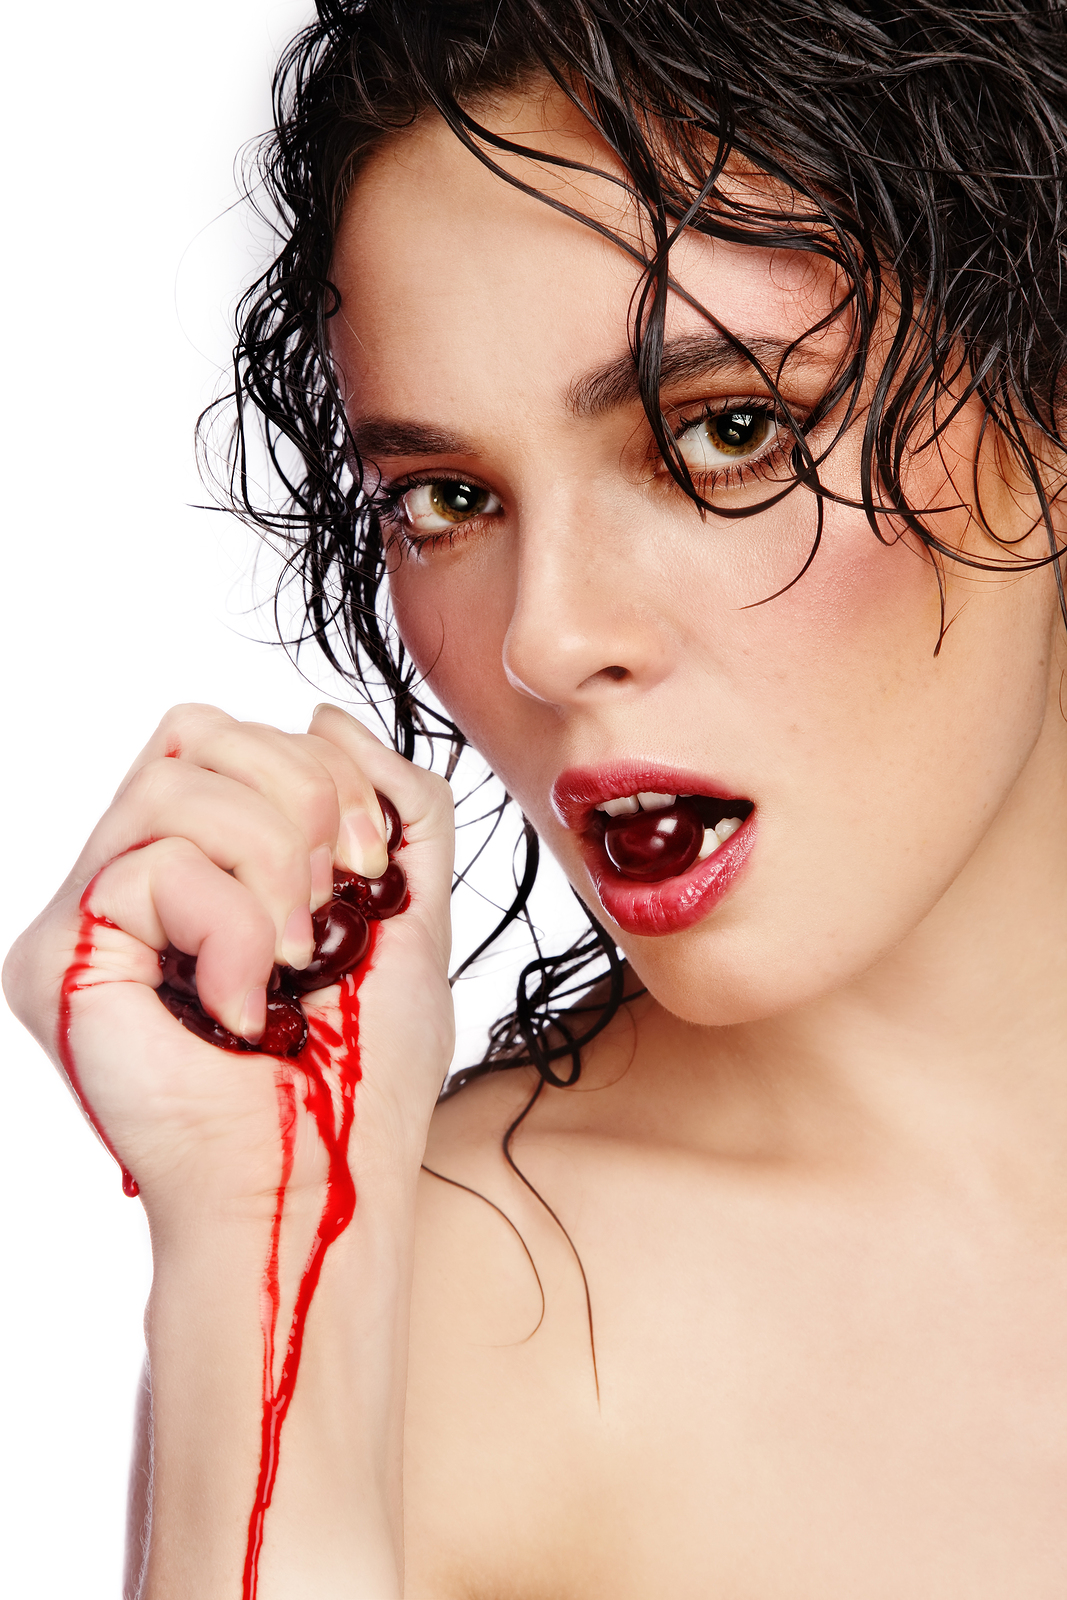 woman eating cherries in her mouth